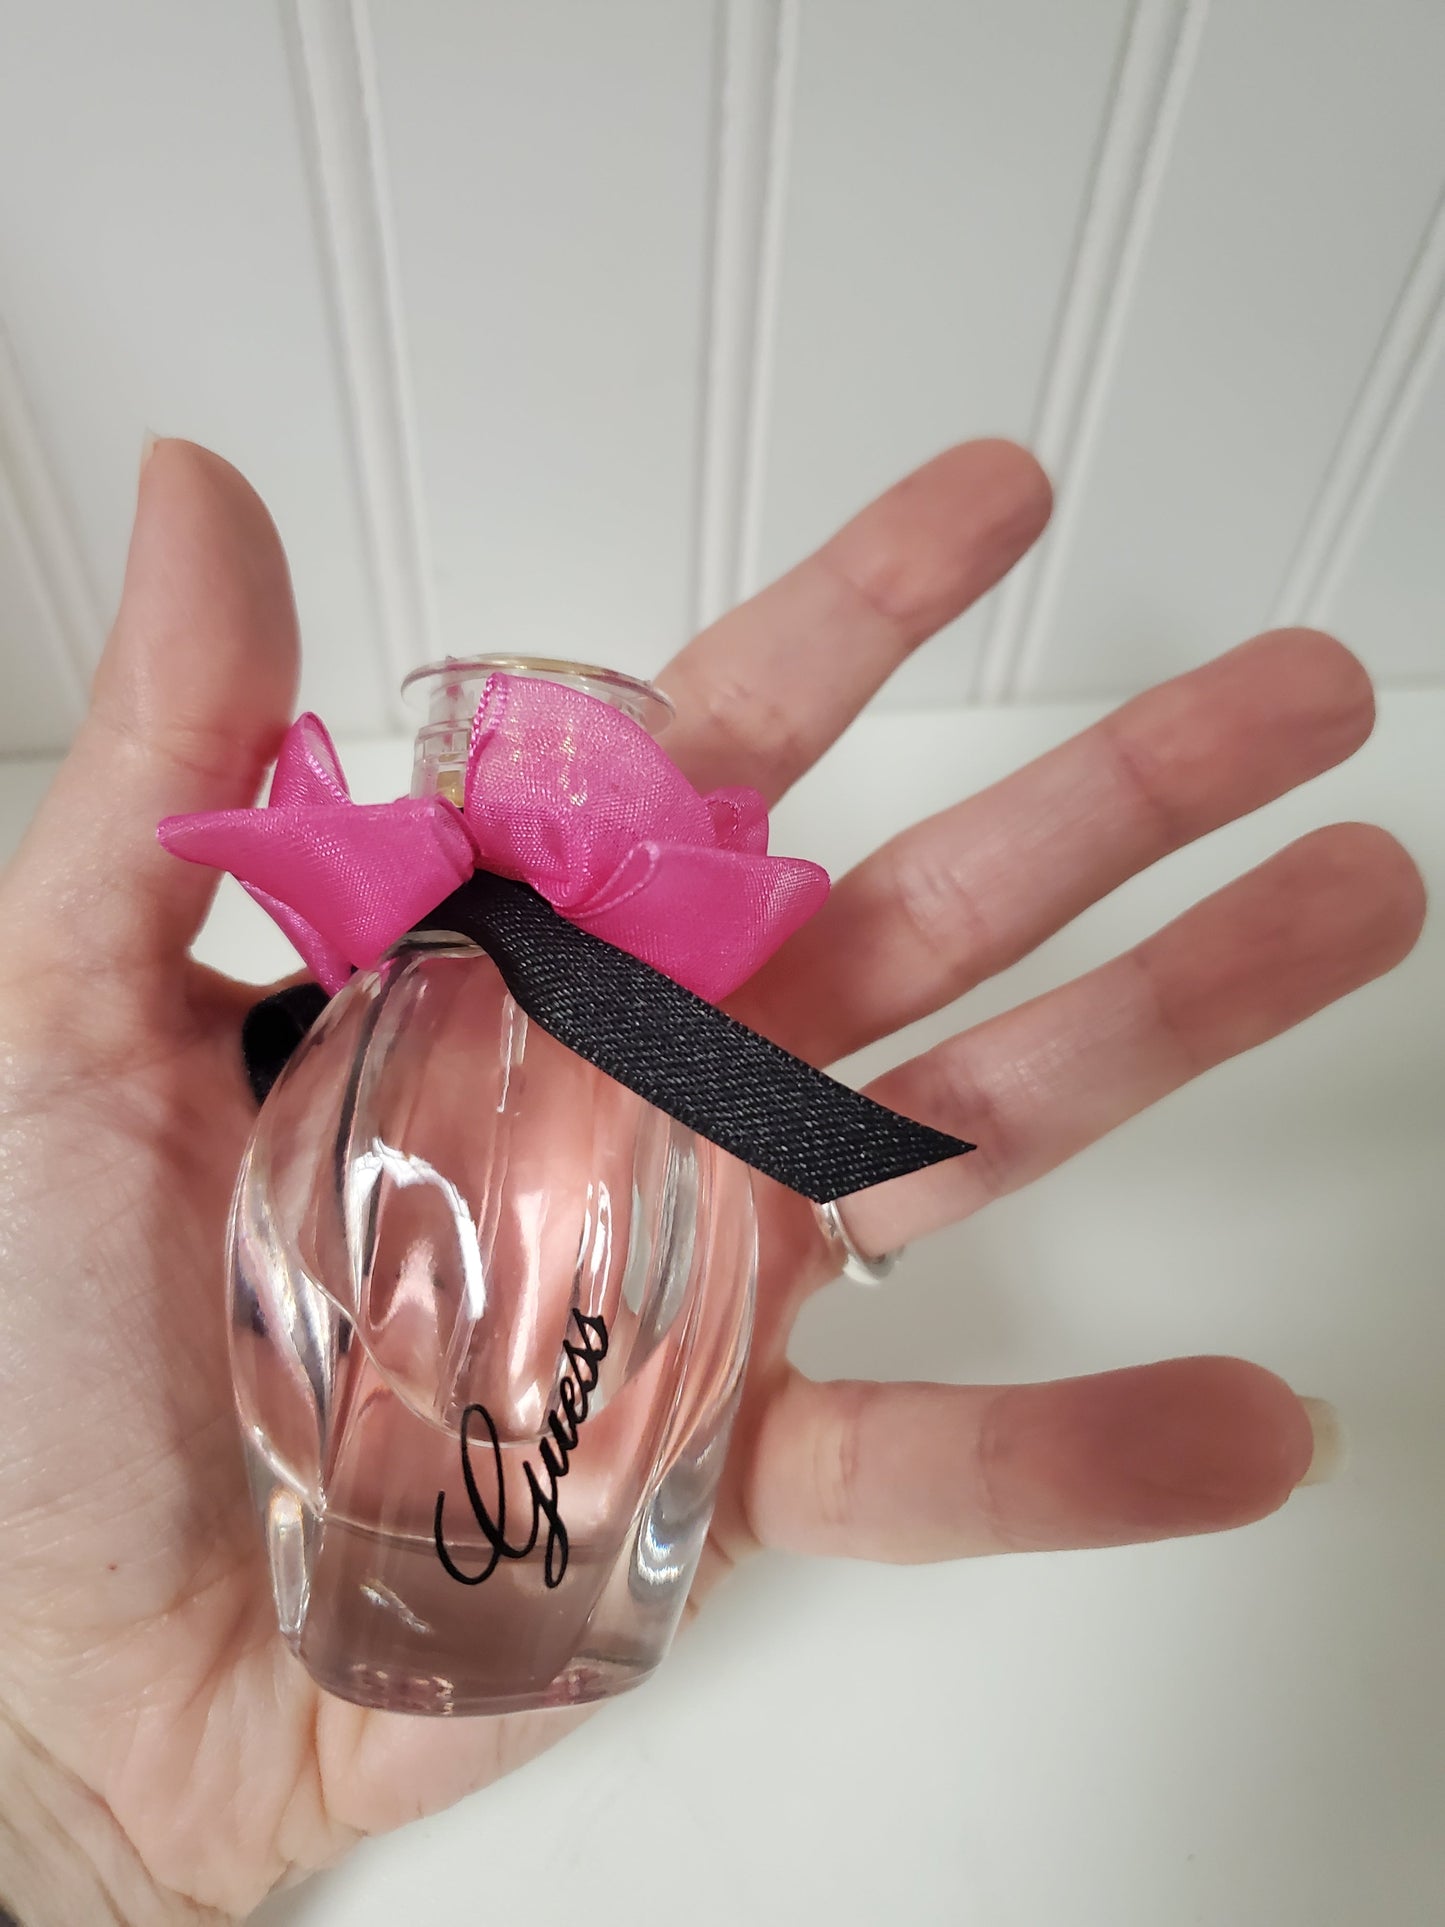 Fragrance Guess, Size 01 Piece